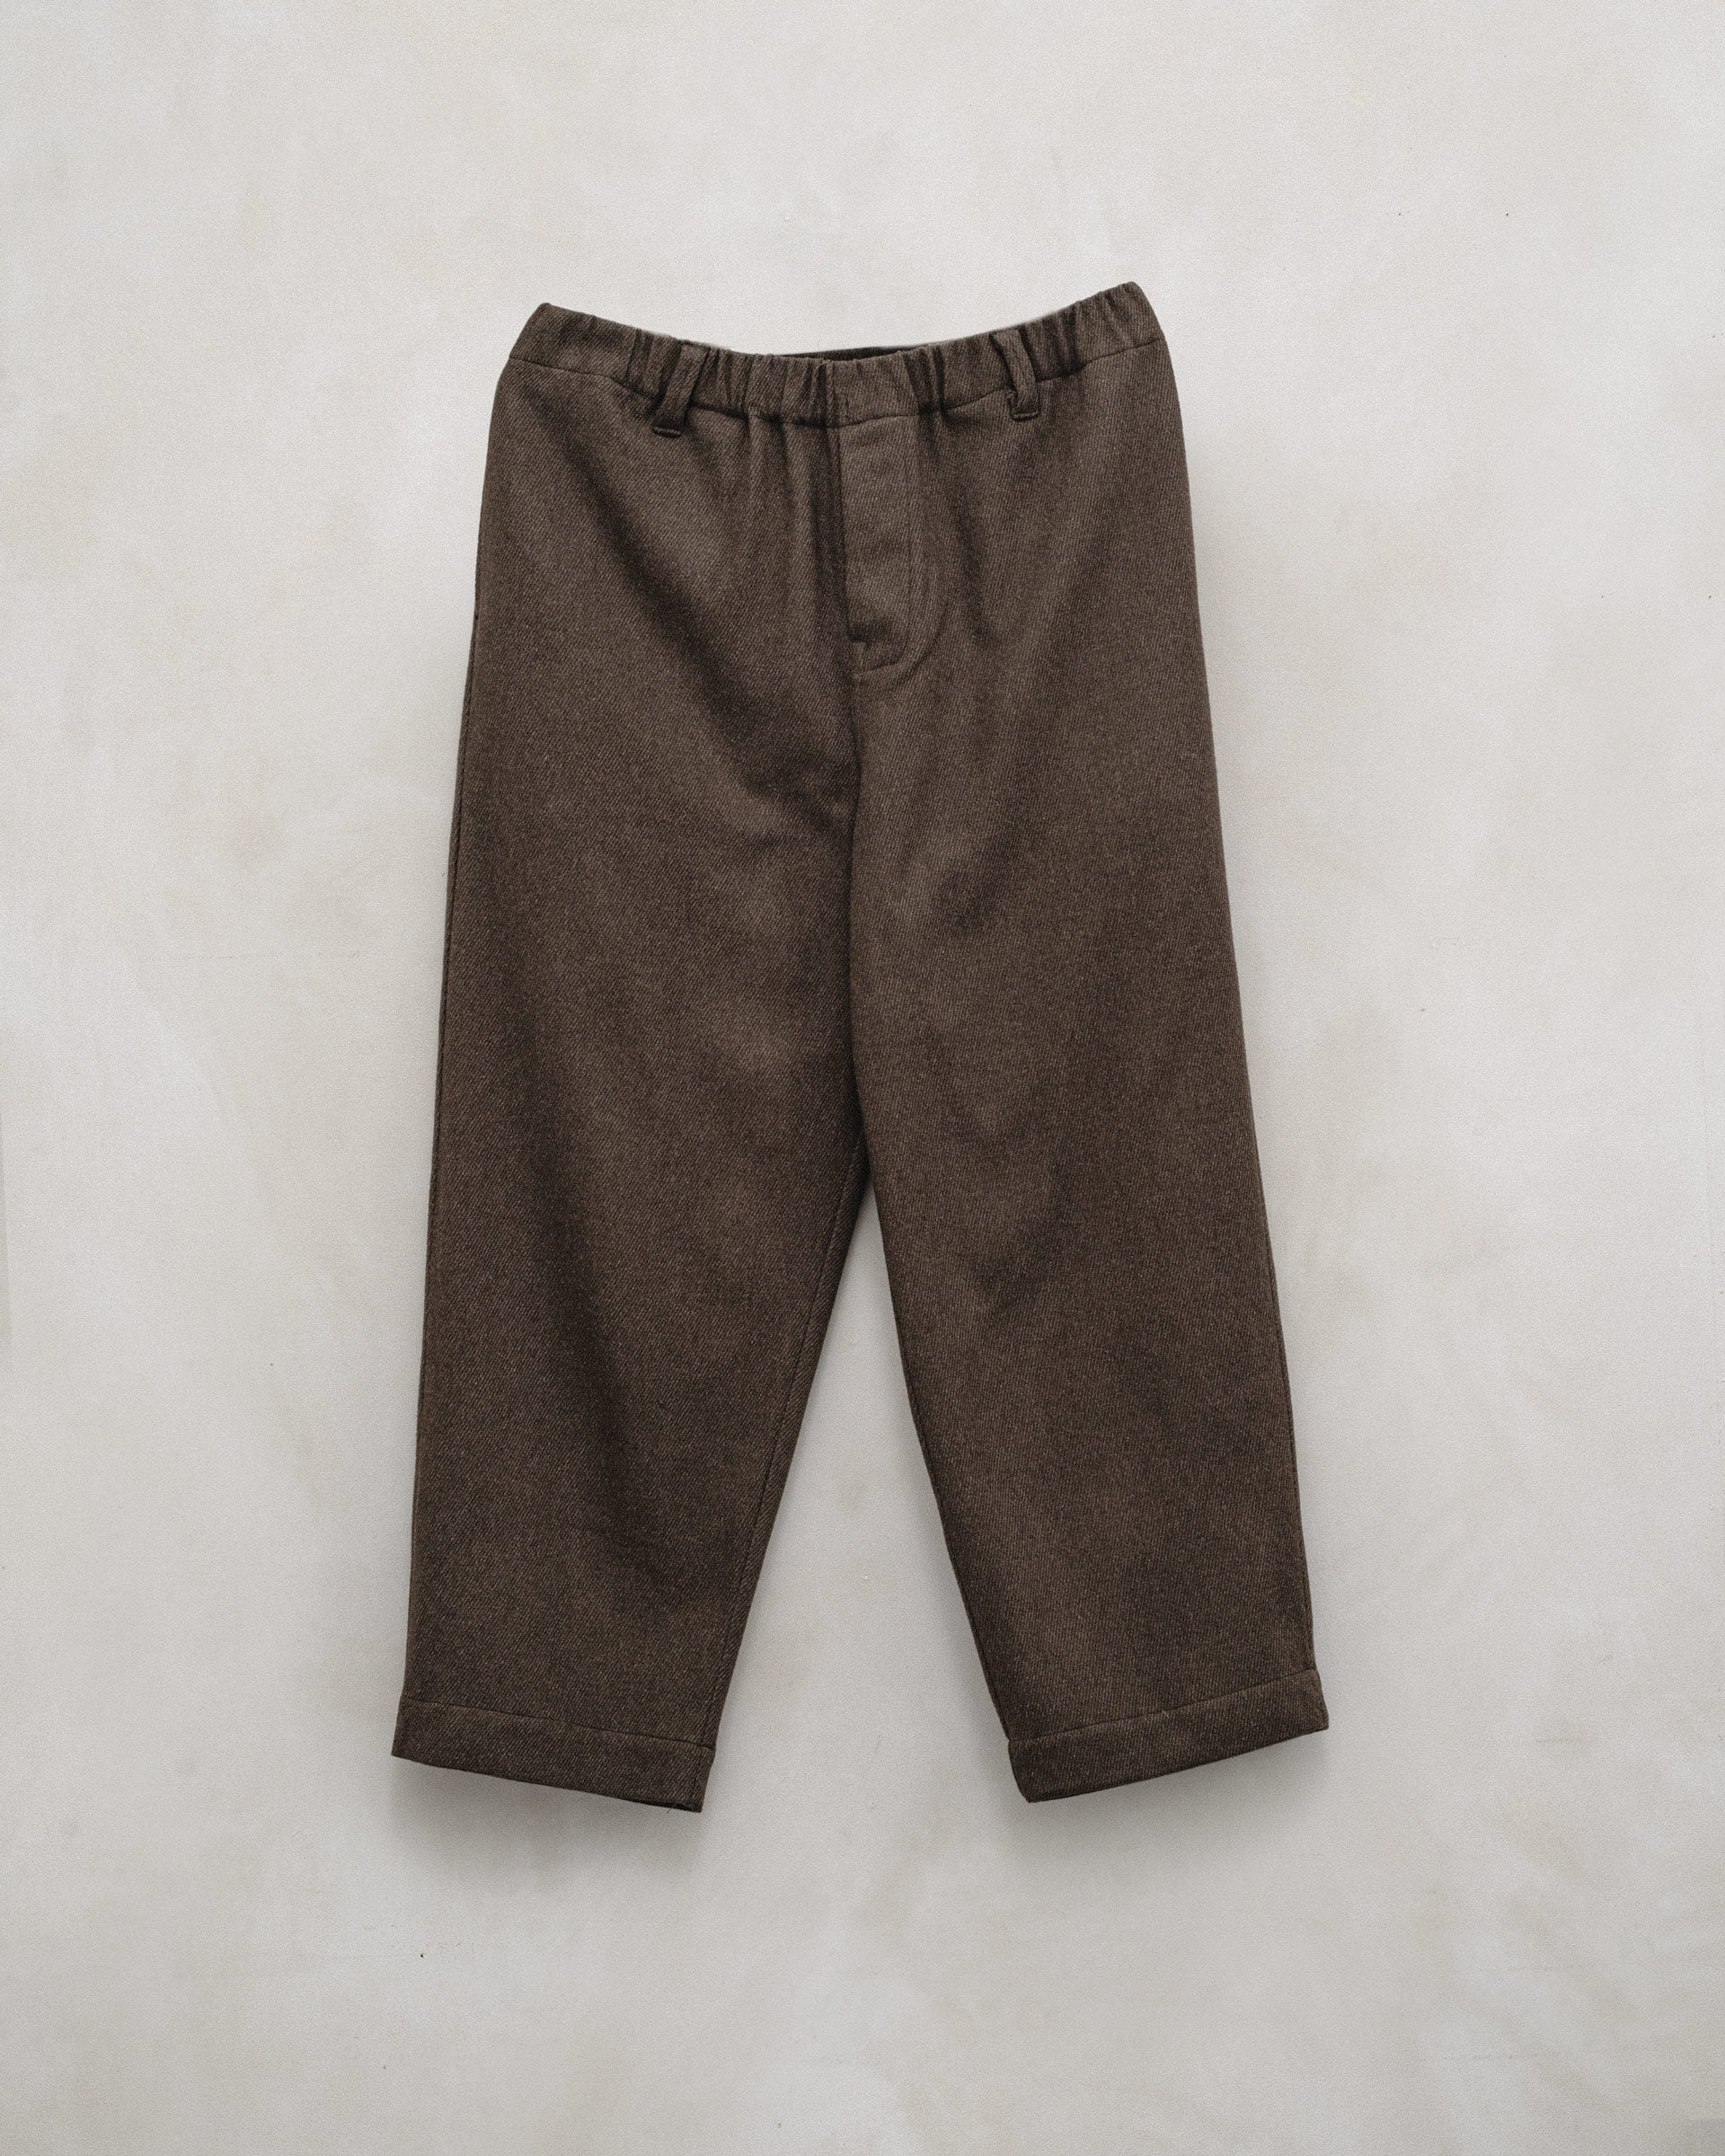 Cotton & Wool Carrot Pants in Alabaster